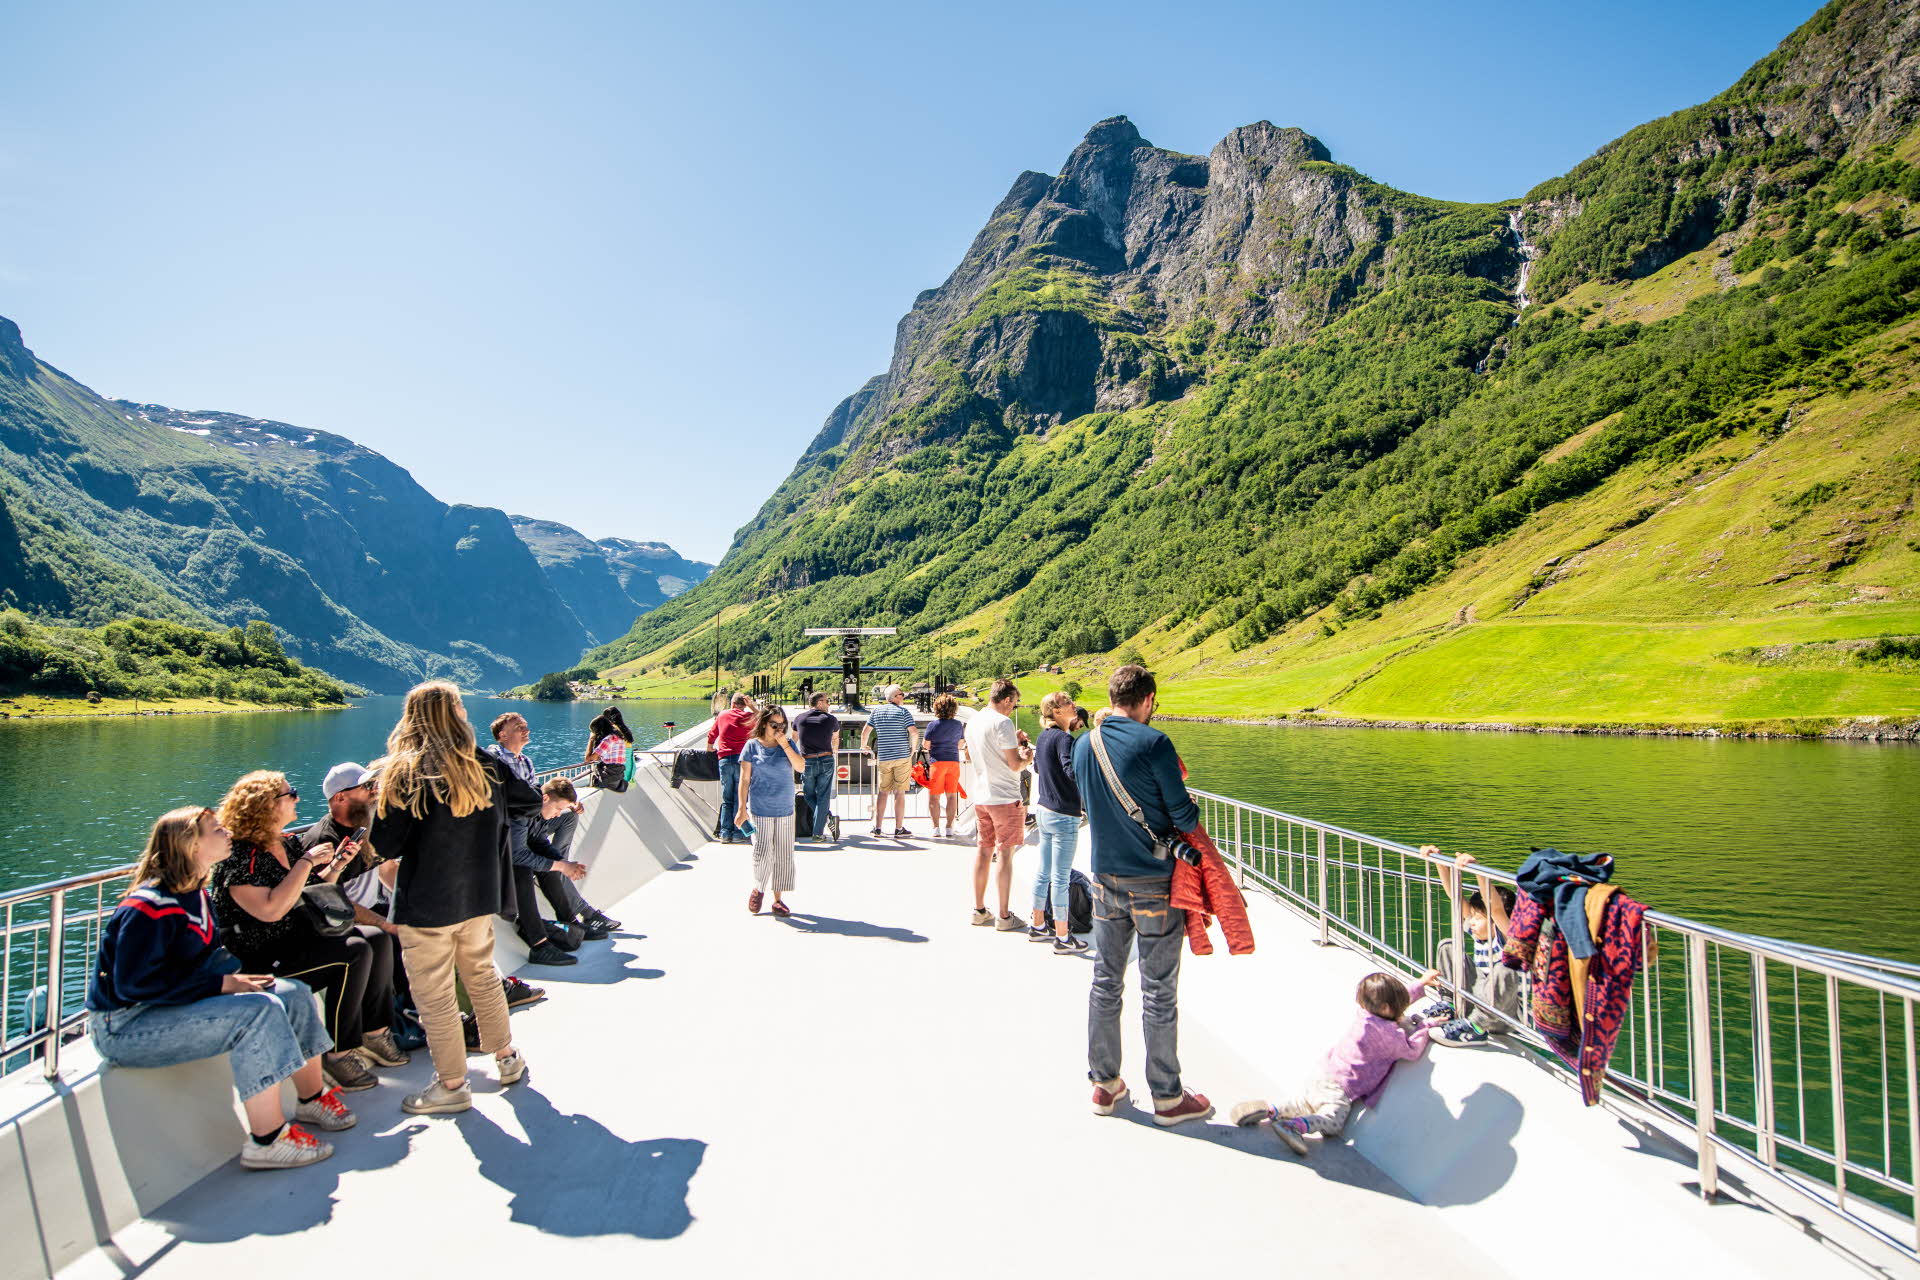 People sitting and standing on the roof of a boat in the Nærøyfjord, with views towards green mountainsides